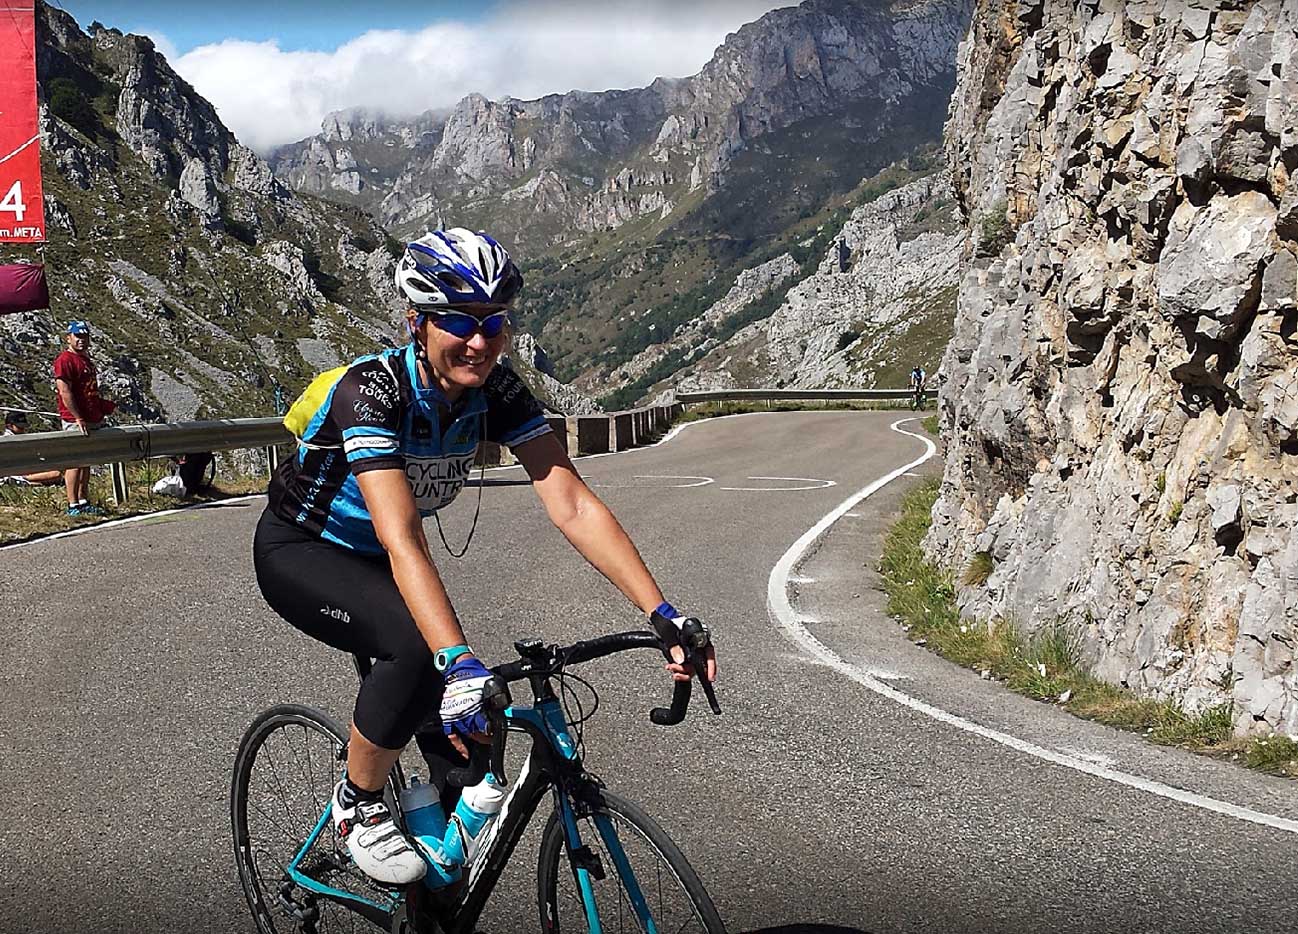 Riding the Best Cycling Climbs at La Vuelta only hours before the peloton